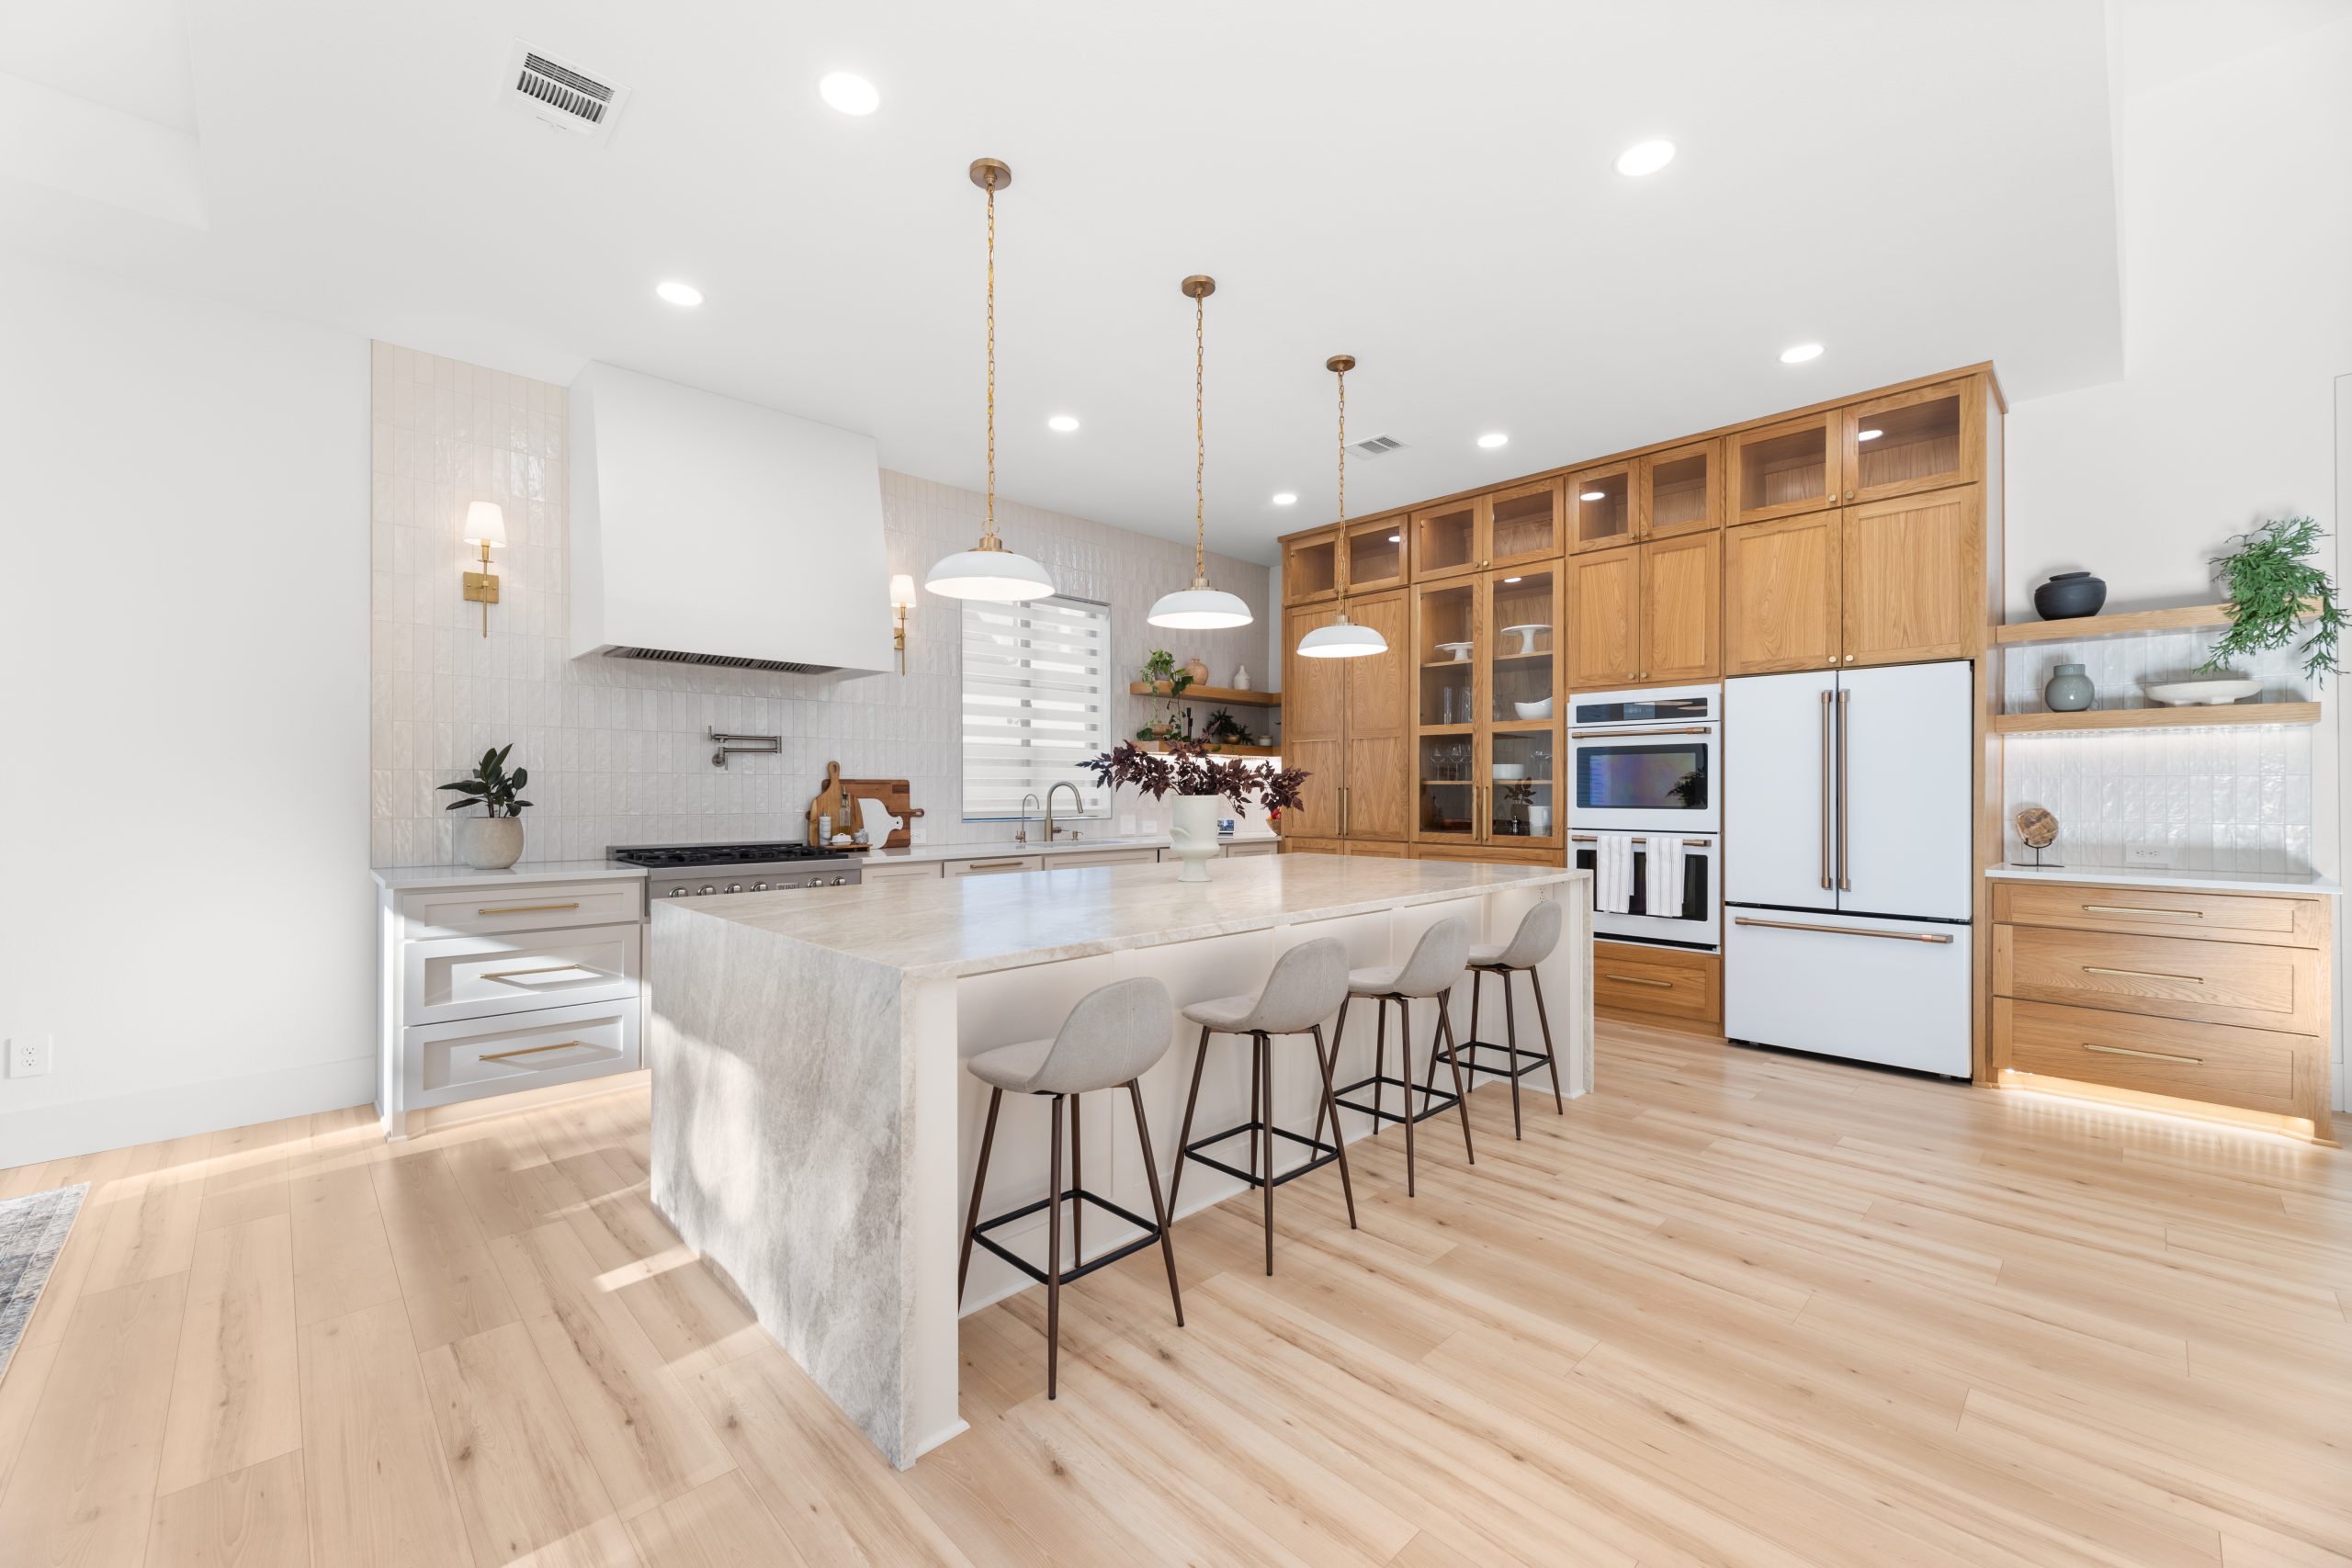 Square Foot's Best Real Estate Photos - a light, bright kitchen with wood accents